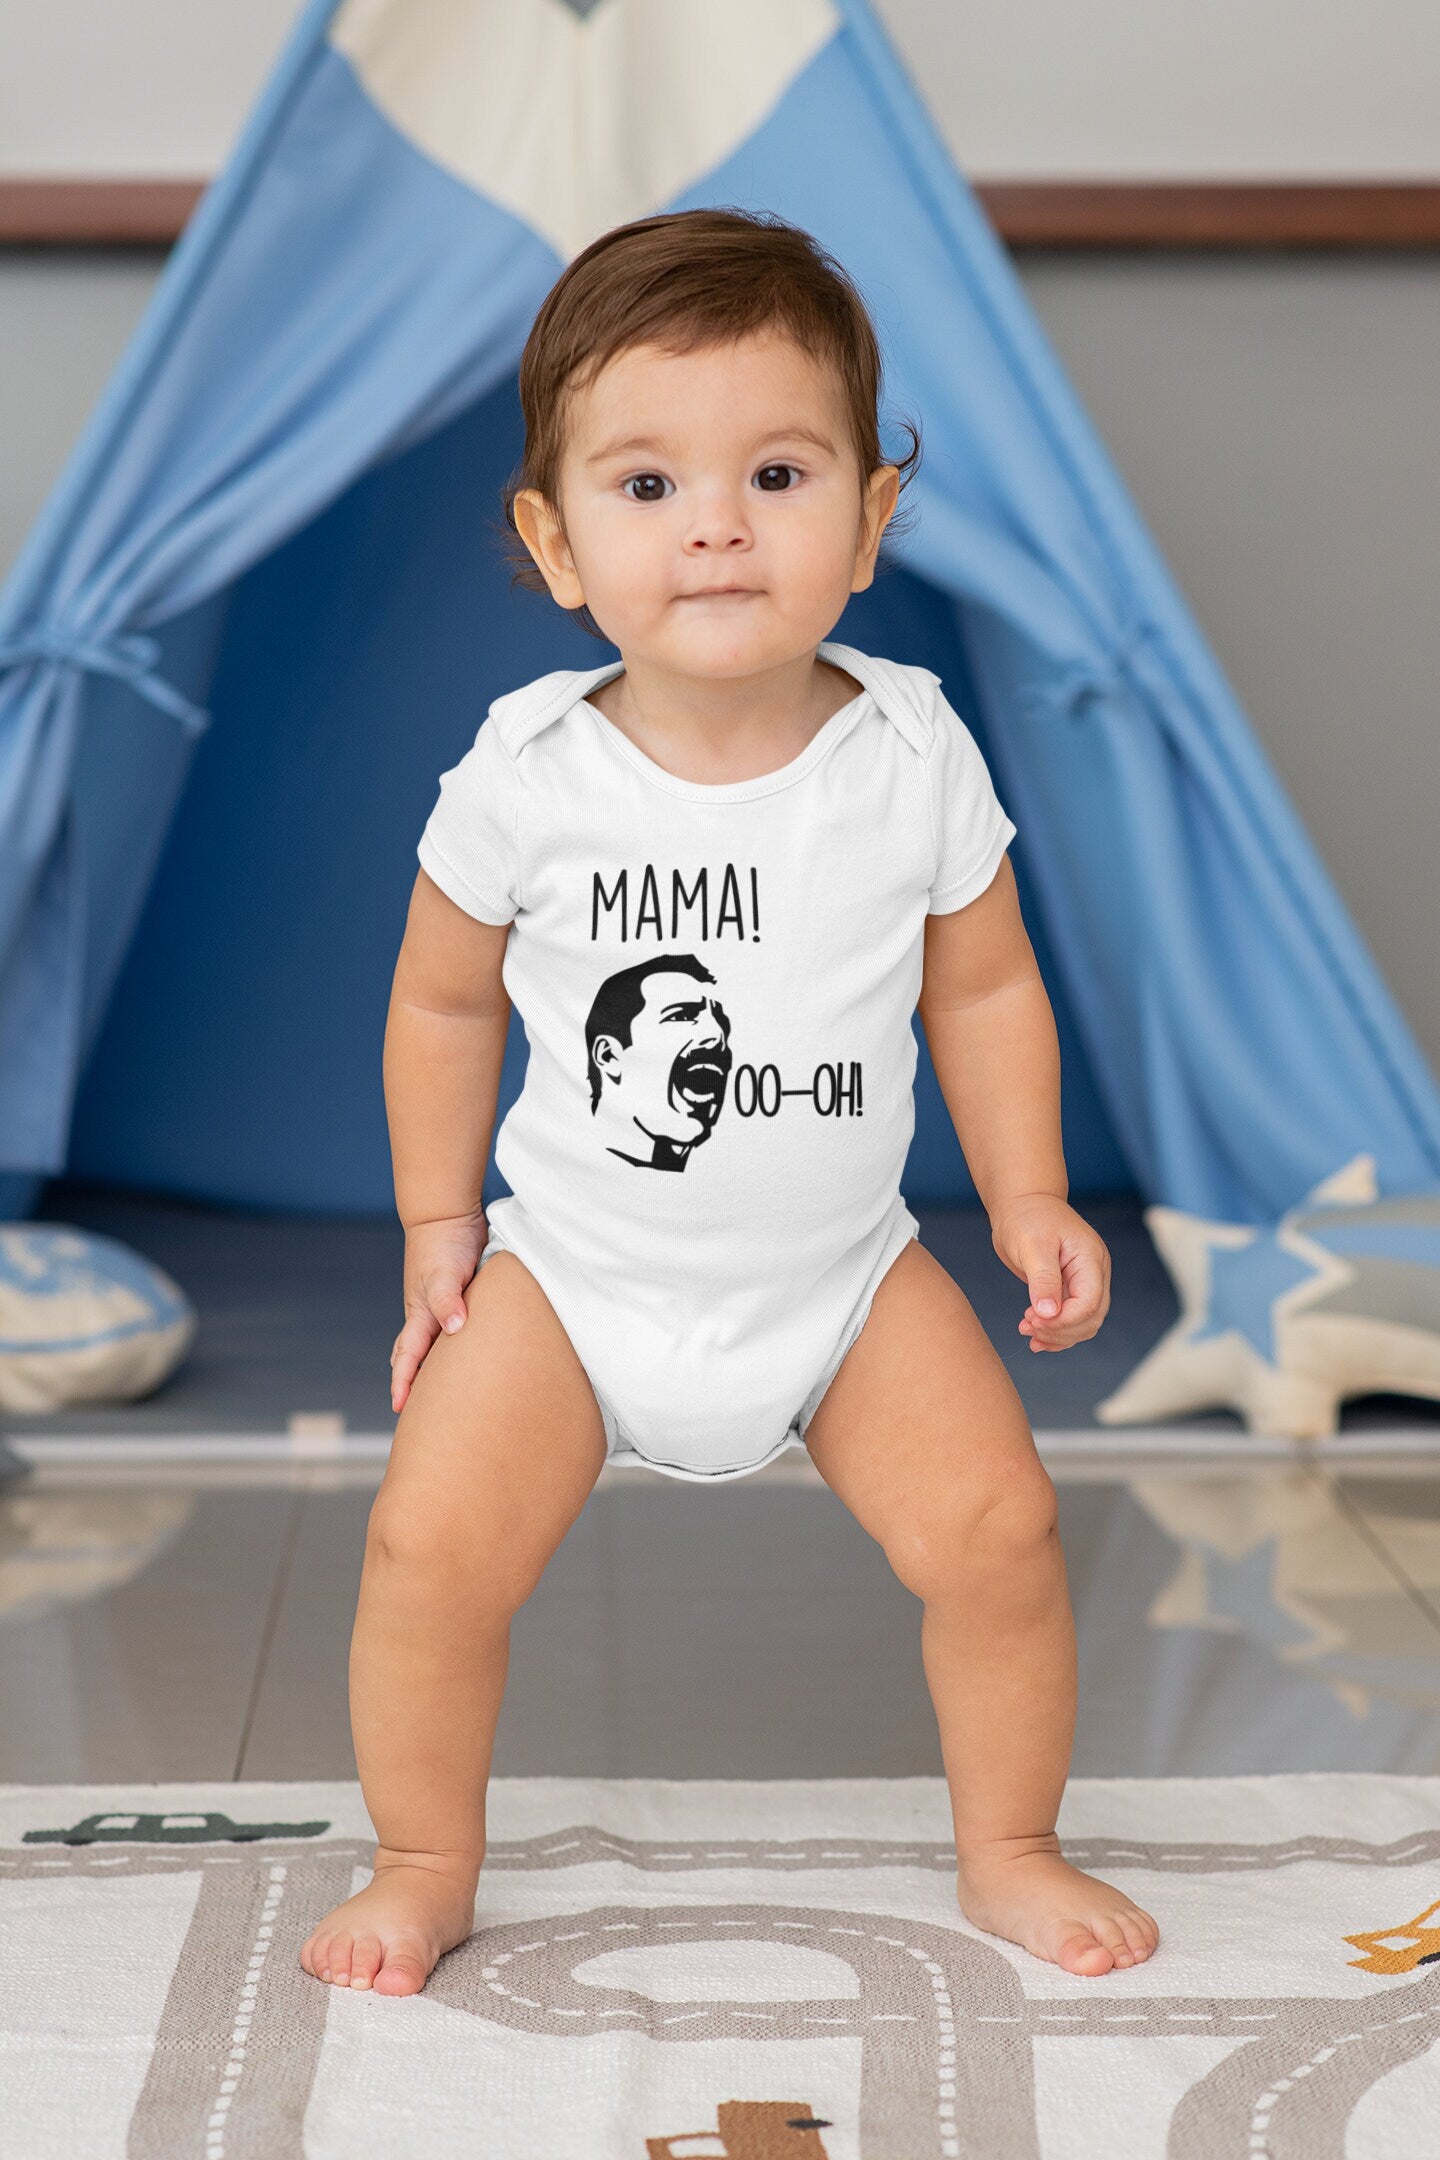 Mama ooooh Bodysuit, Funny saying Onesie, Queen Rock Band Gift, Bohemian Bodysuit, Pregnancy Announcement, Funny Baby Grow, Baby Shower Gift